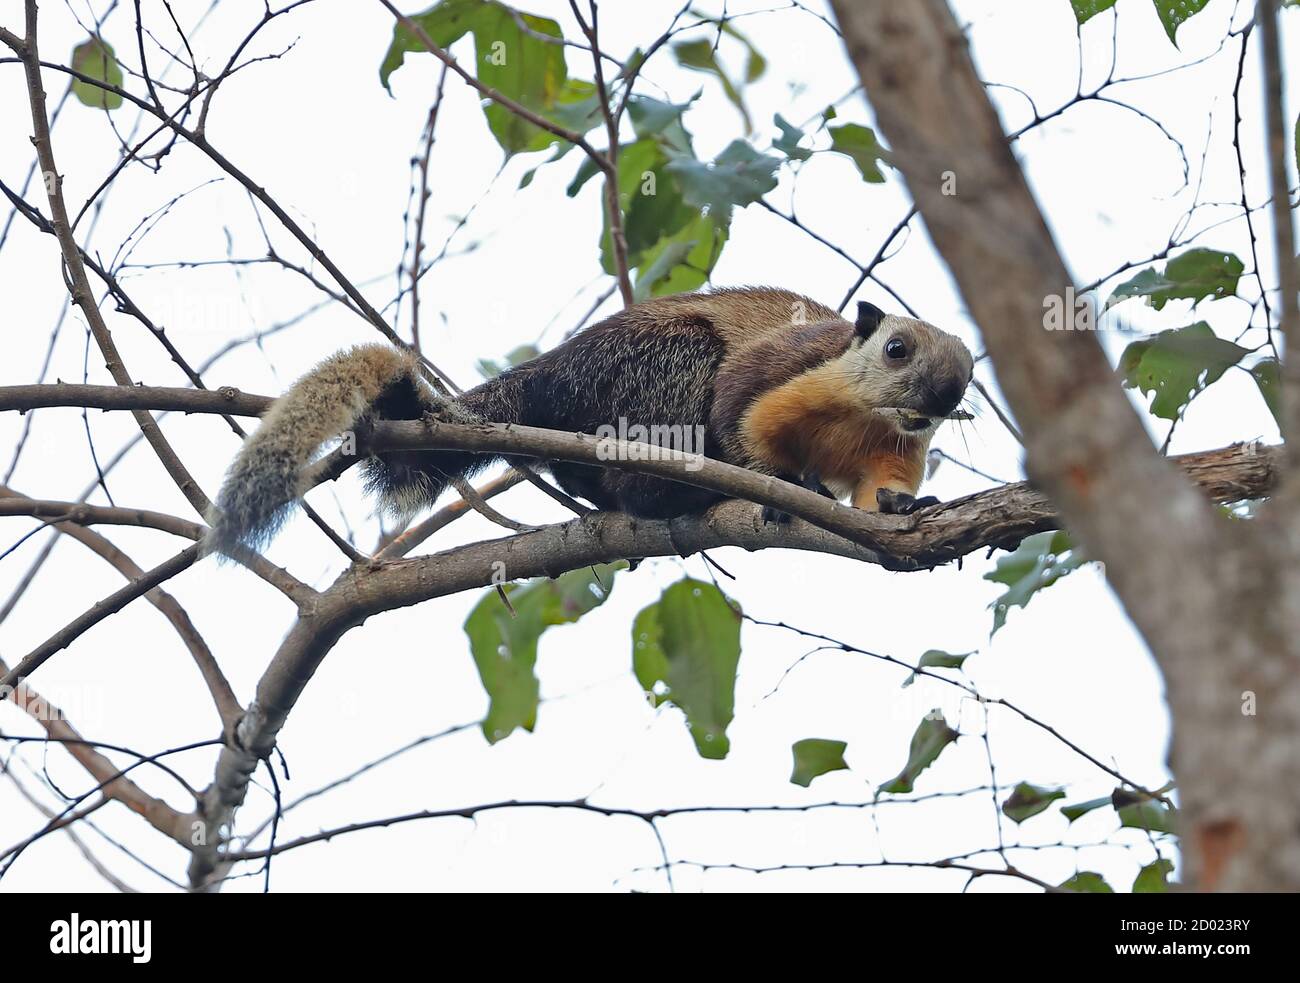 Black Giant Squirrel (Ratufa bicolor bicolor) adult on branch with stick in mouth  Bali Barat NP, Bali, Indonesia         July Stock Photo